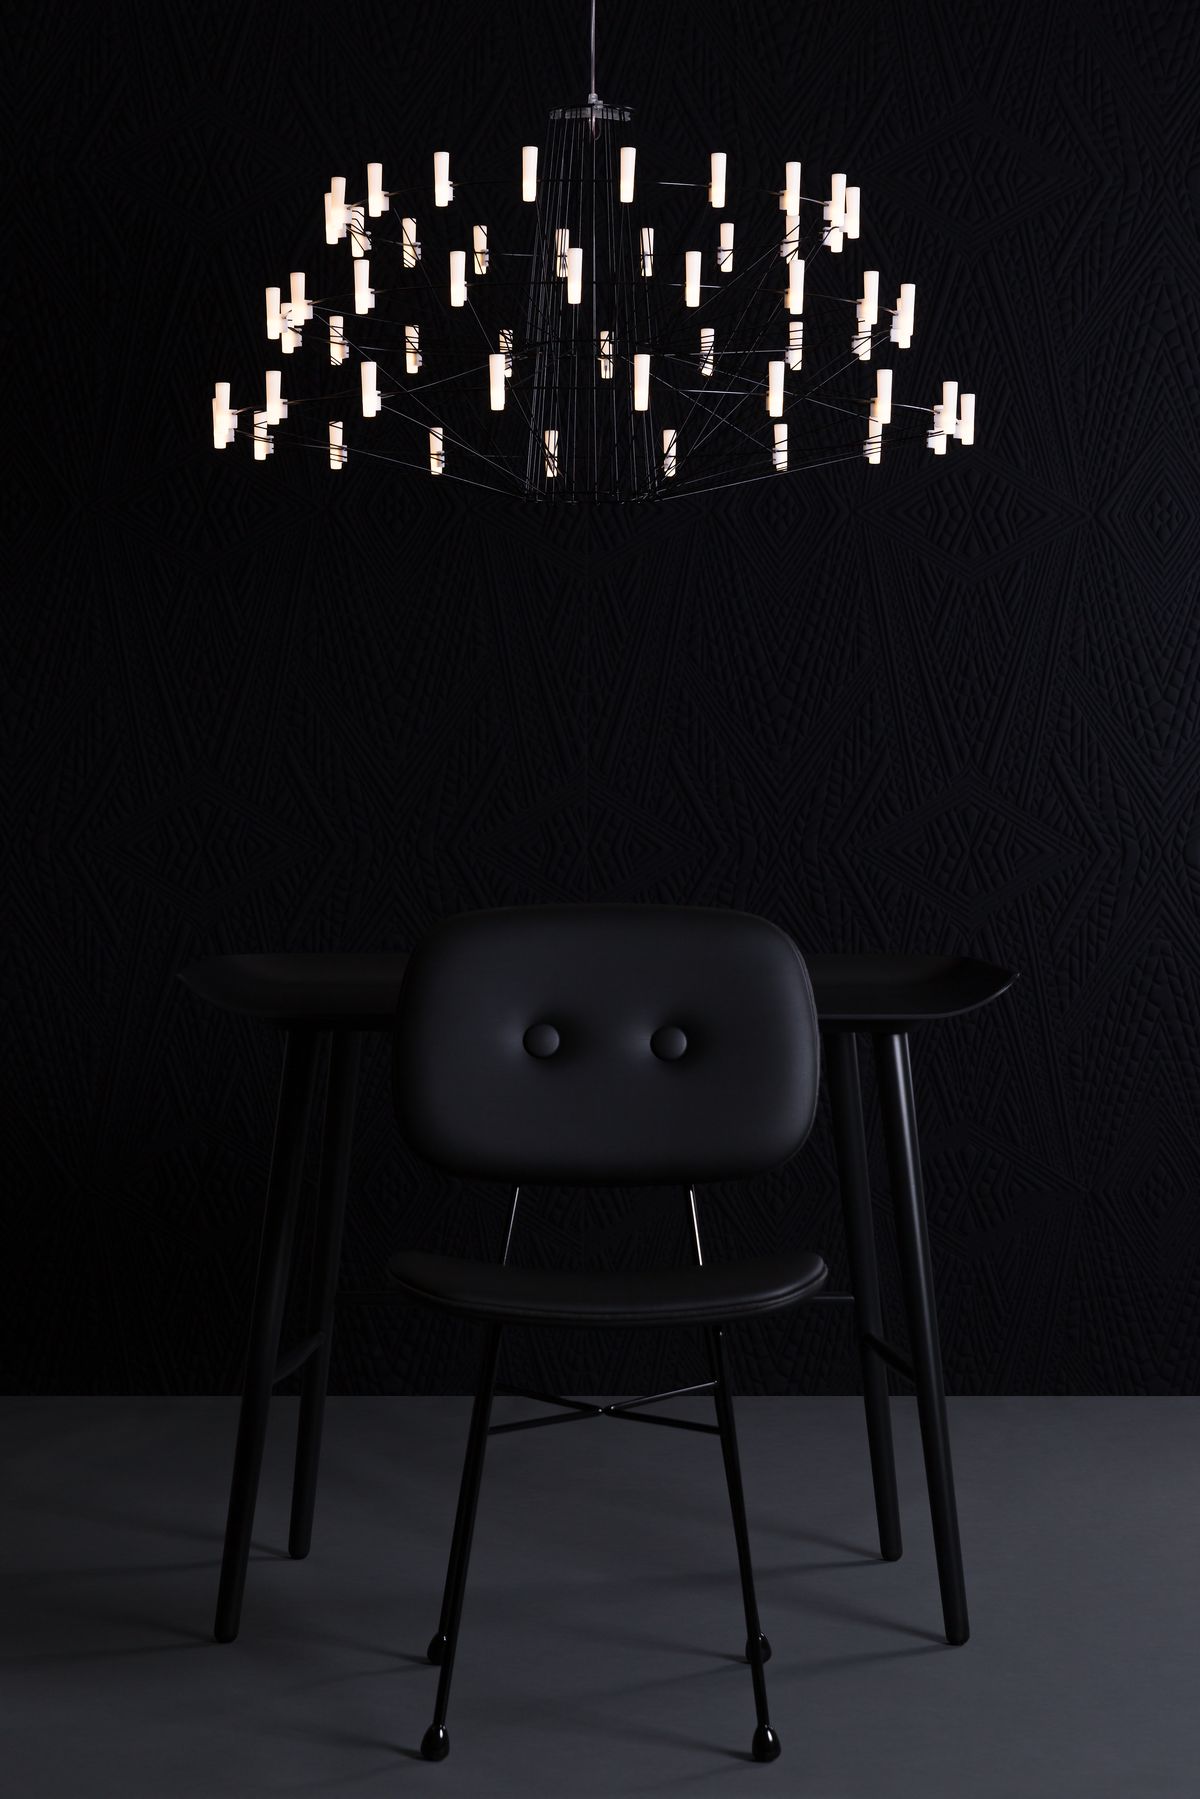 Chandelier COPPELIA by Moooi